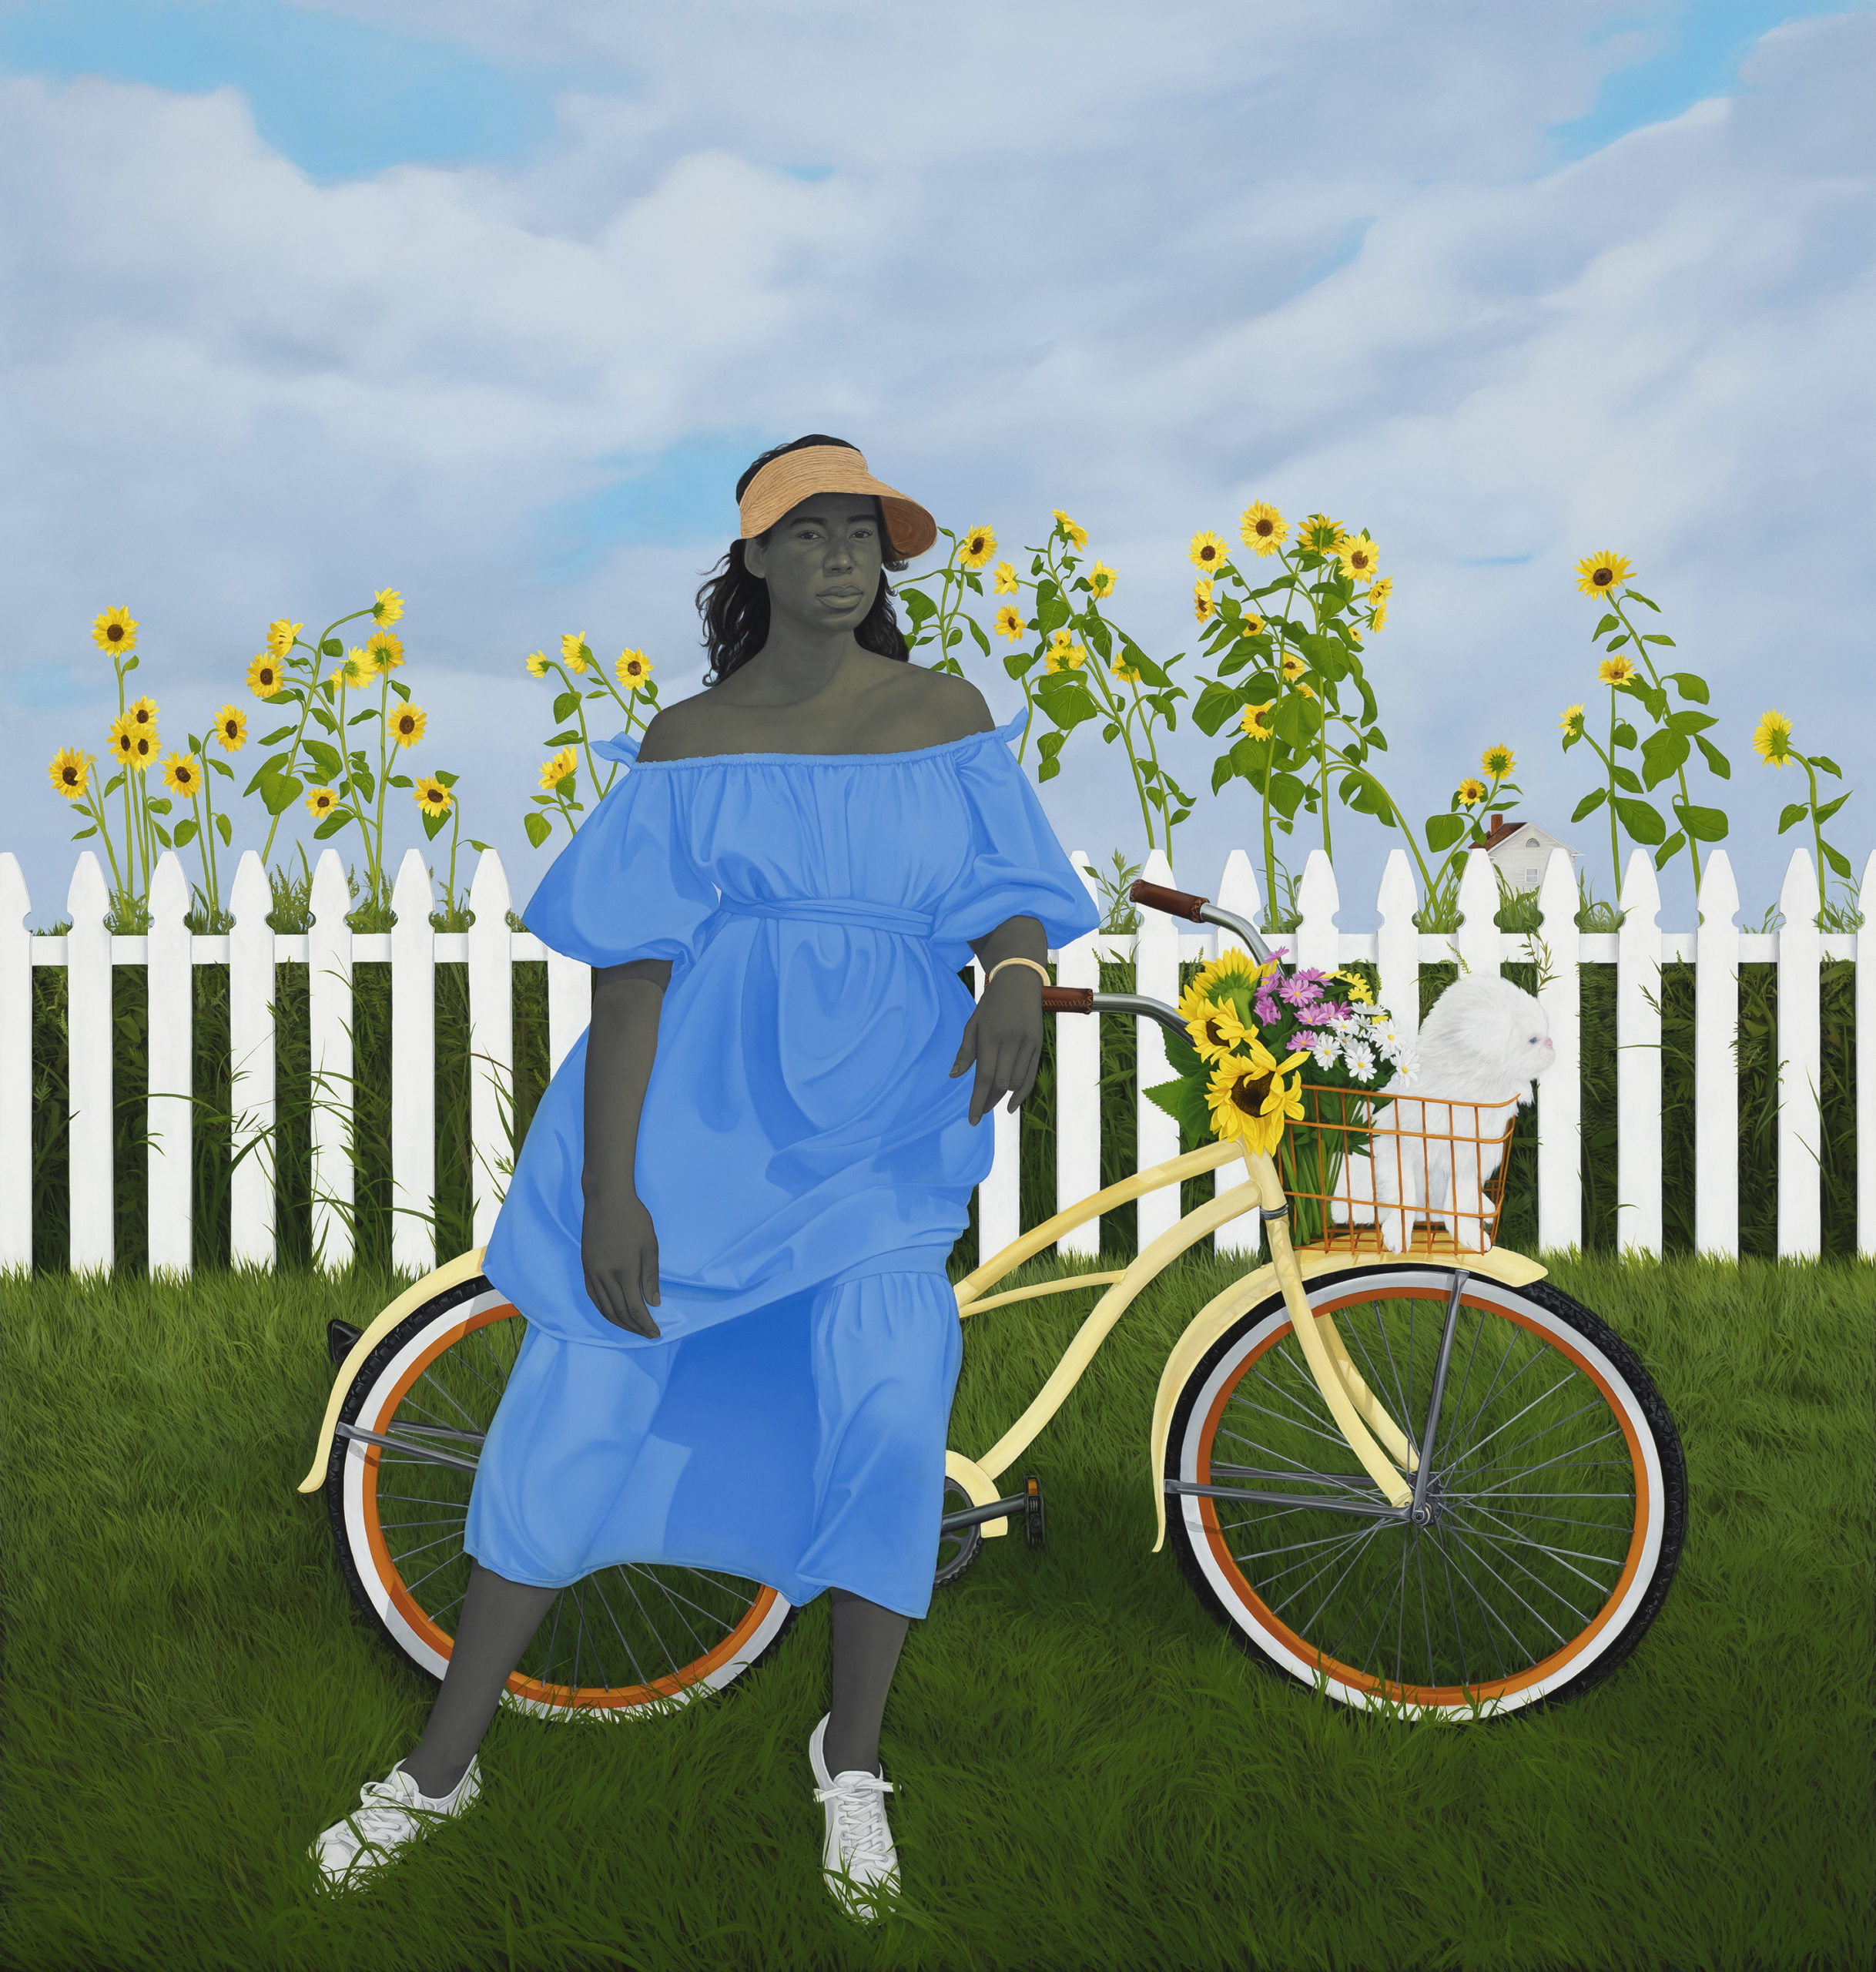 Painting by Amy Sherald - a woman in a blue dress leans agains a yellow bicycle. She stands in front of a white picket fence with sunflowers growing around it.